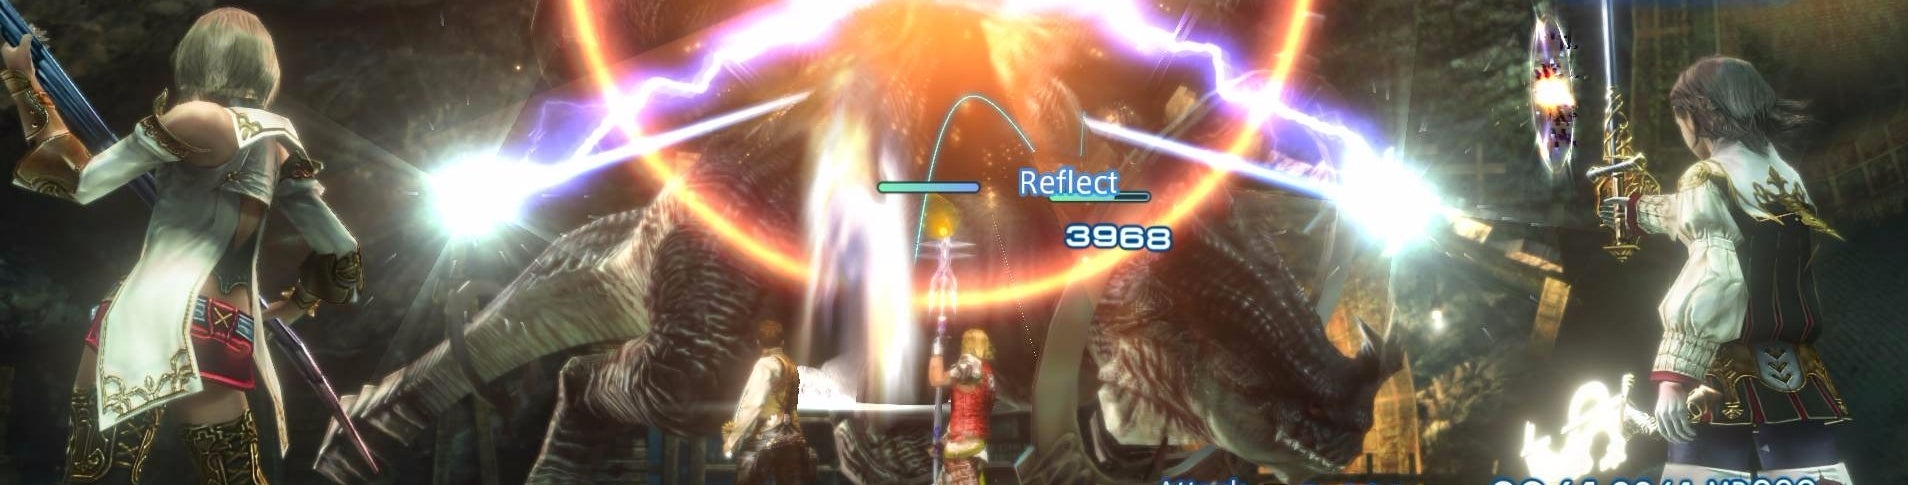 Image for Final Fantasy 12 on PC delivers 60fps - but system requirements are high